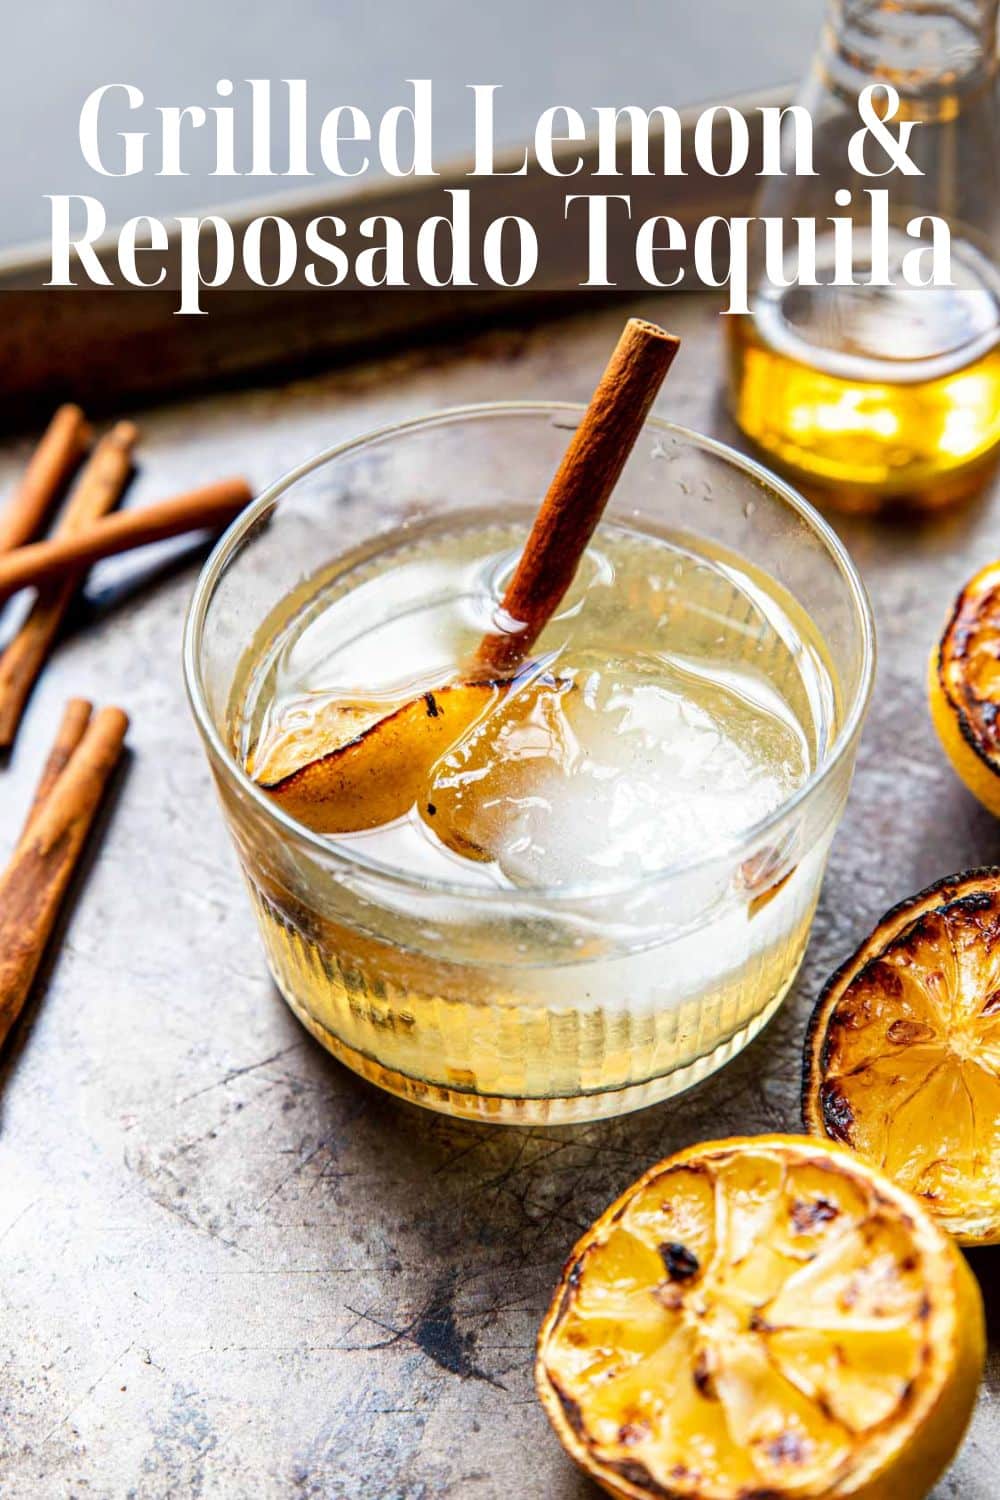 Pinterest Image for Grilled Lemon and Reposado Tequila Cocktail